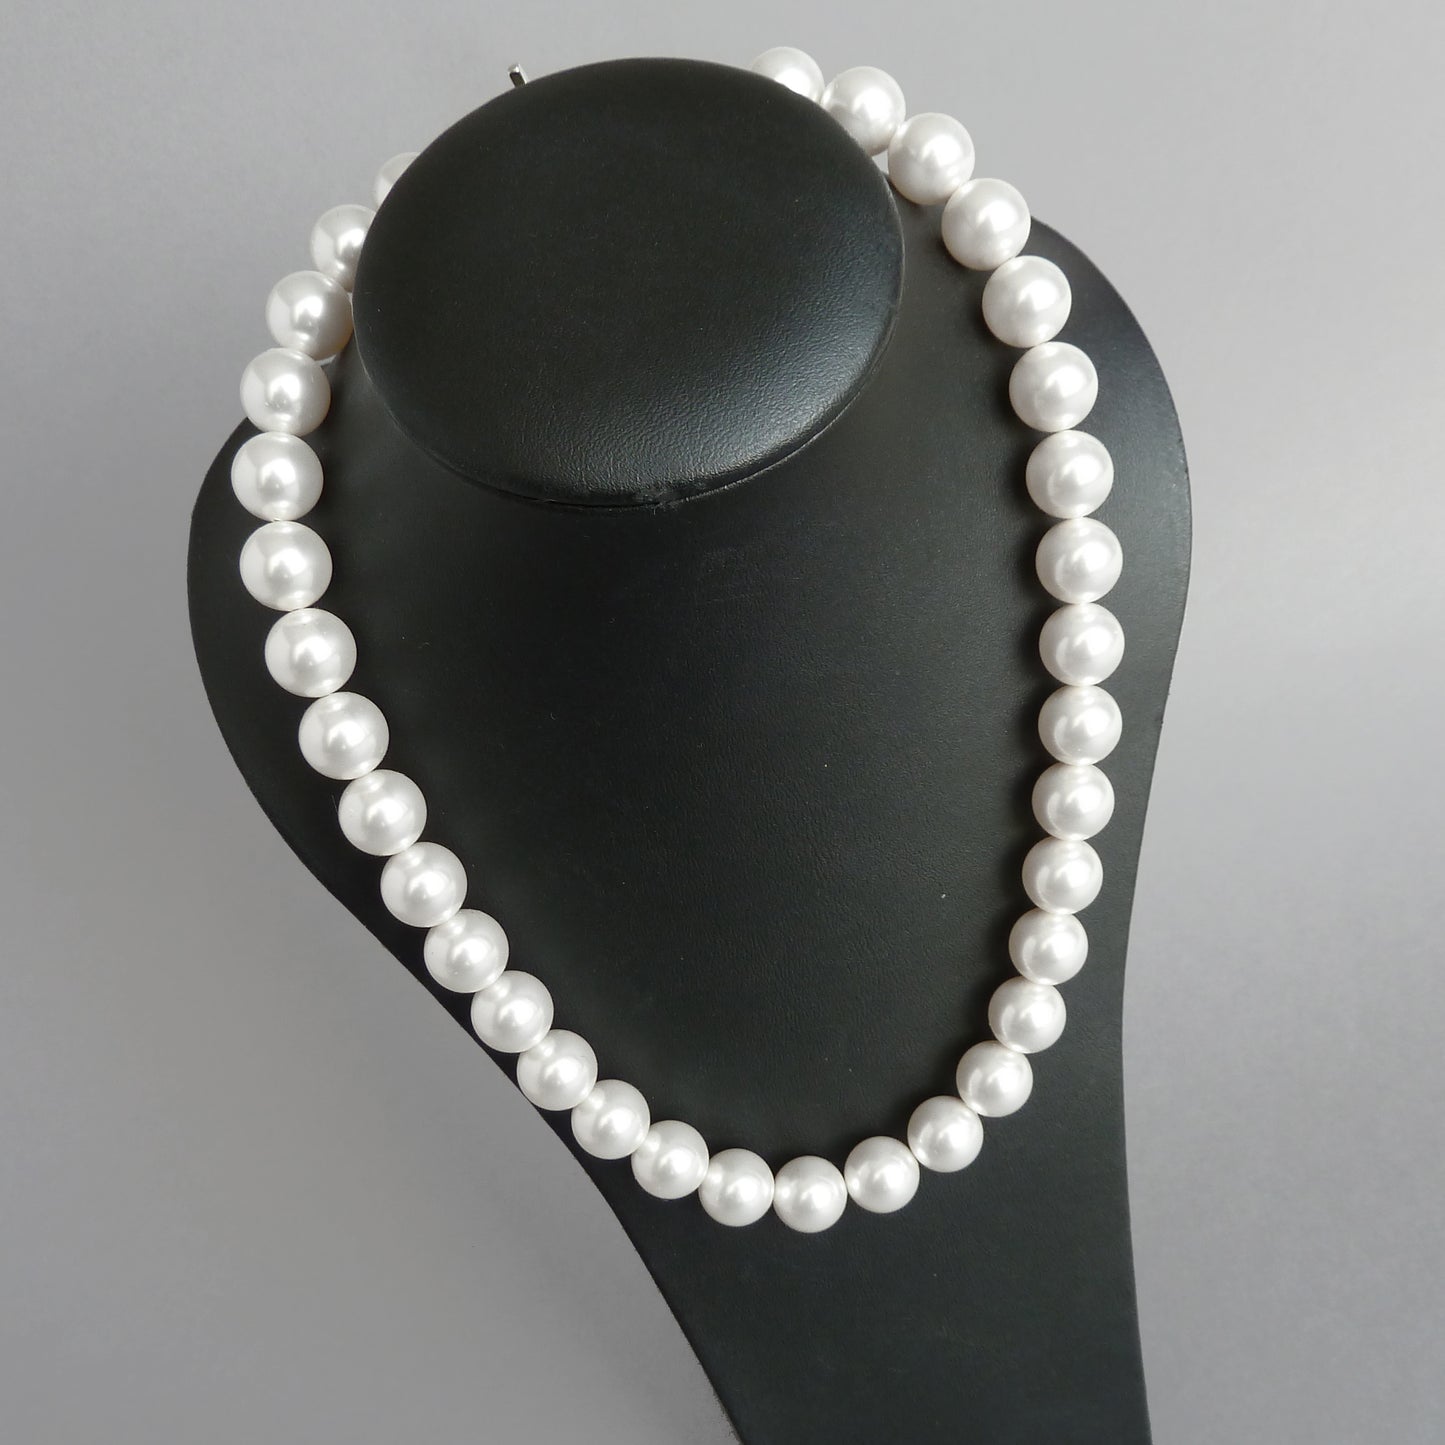 Chunky pearl necklaces